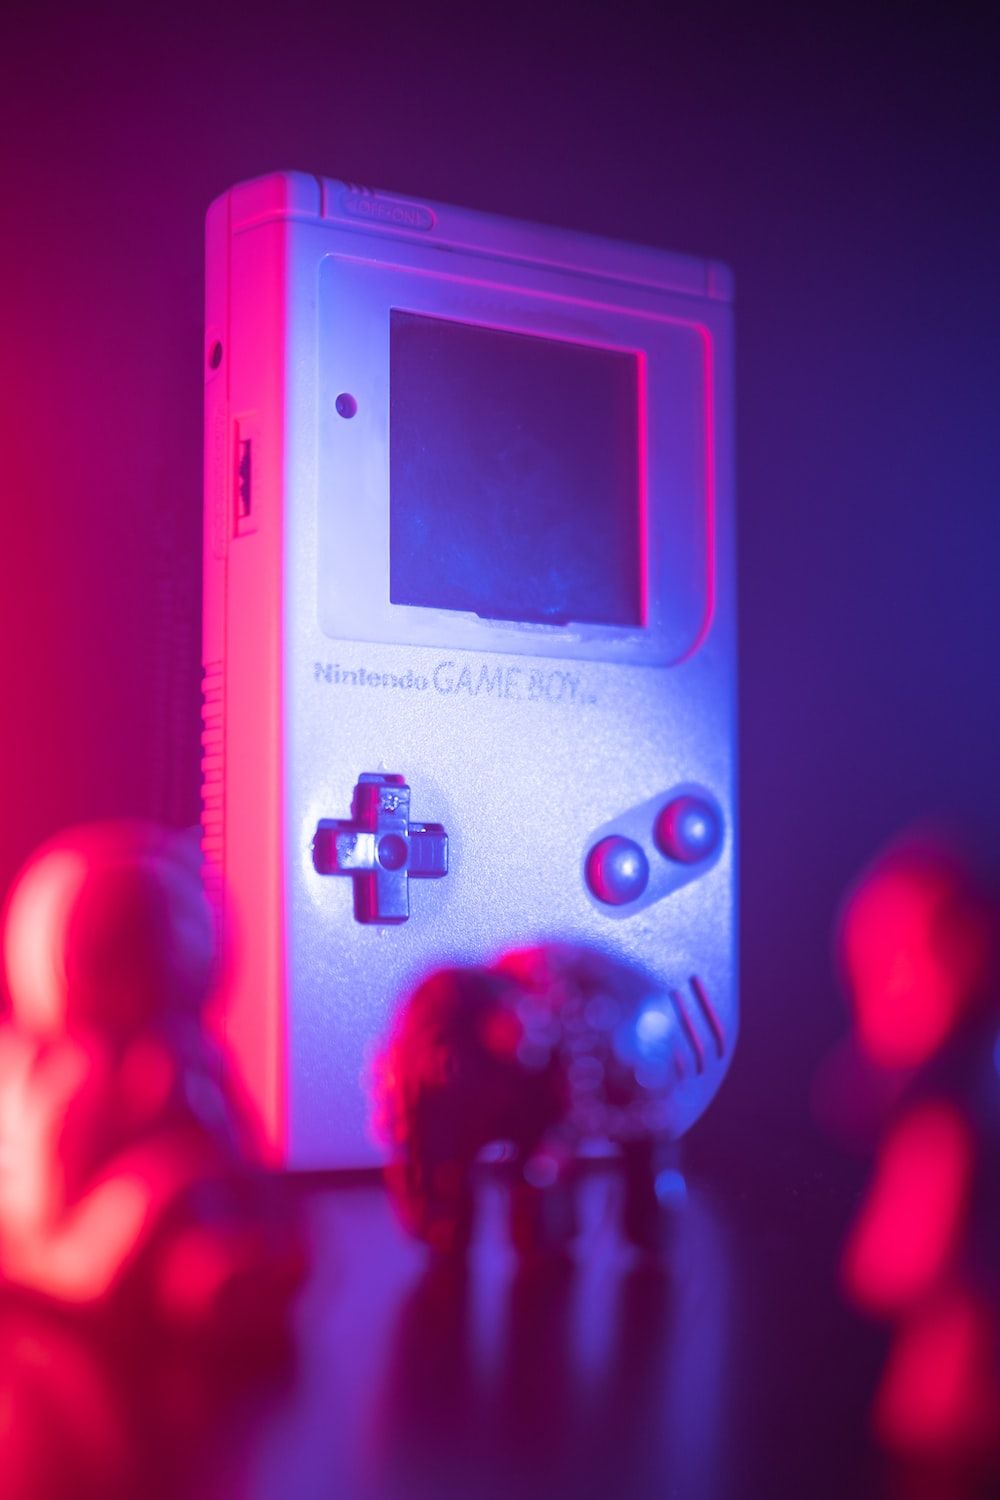 A nintendo game boy sitting on top of a